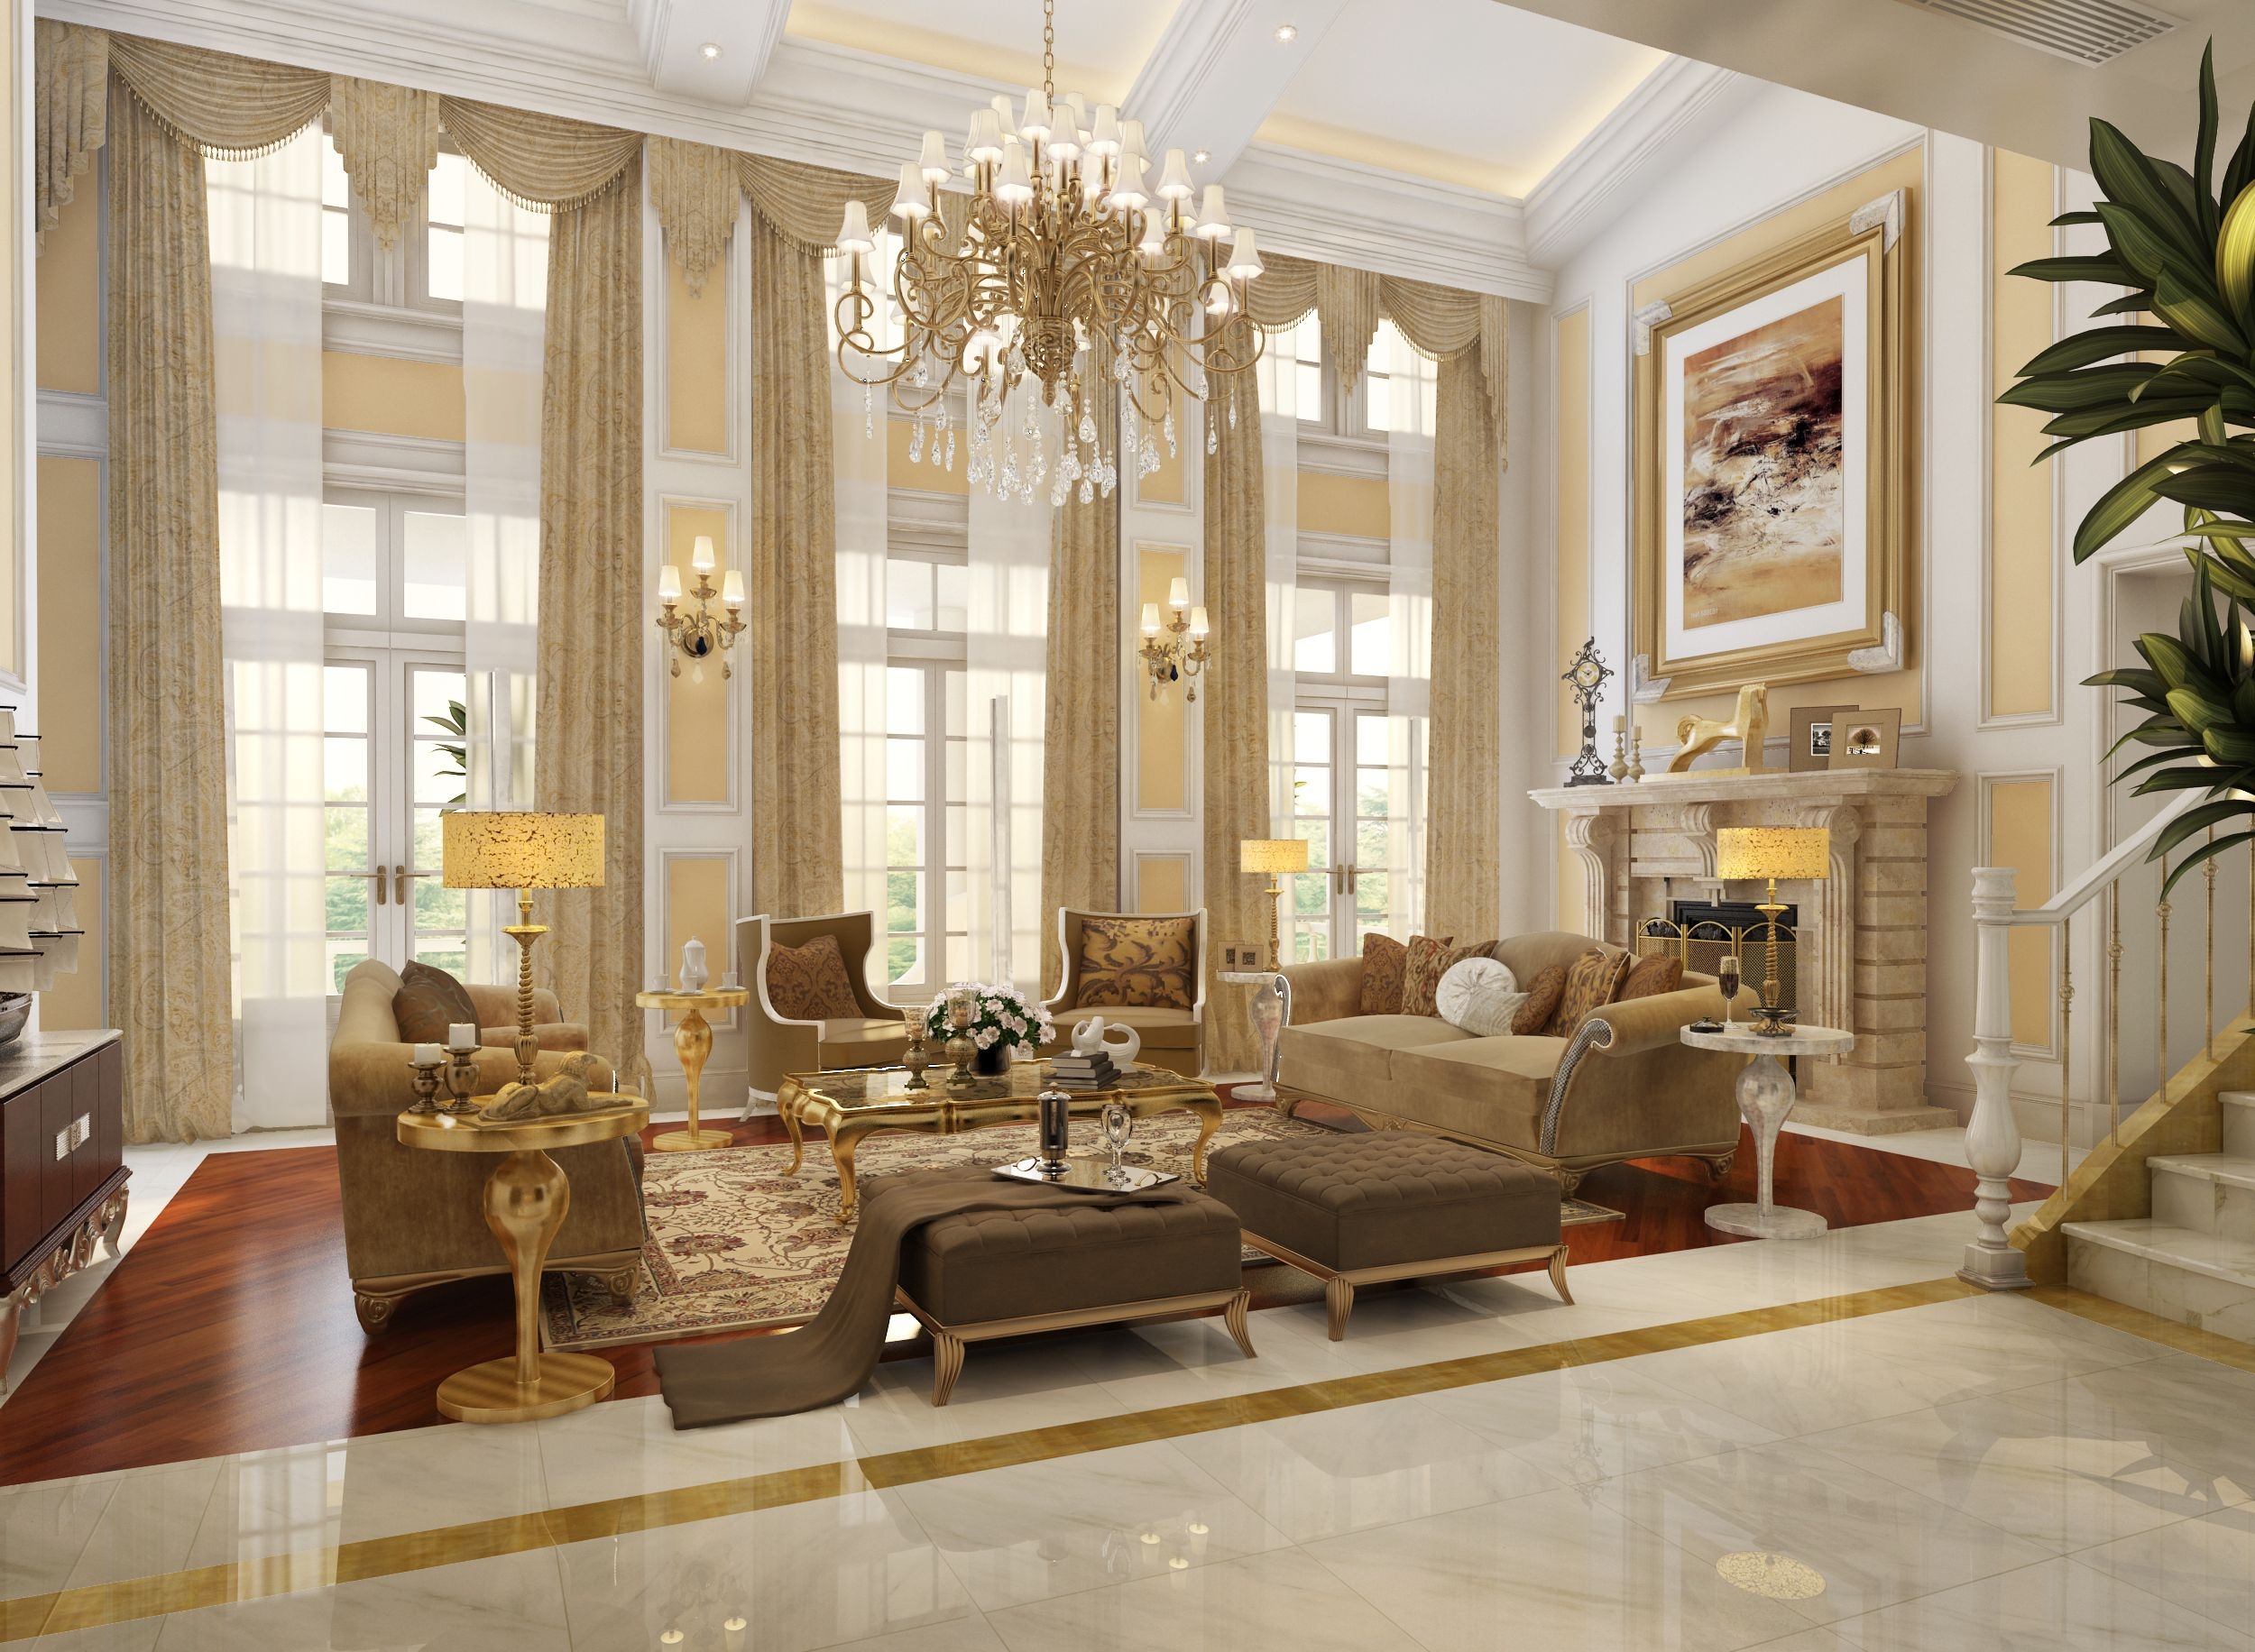 24 Luxurious Interior Design Inspirations For Your New Home with ...